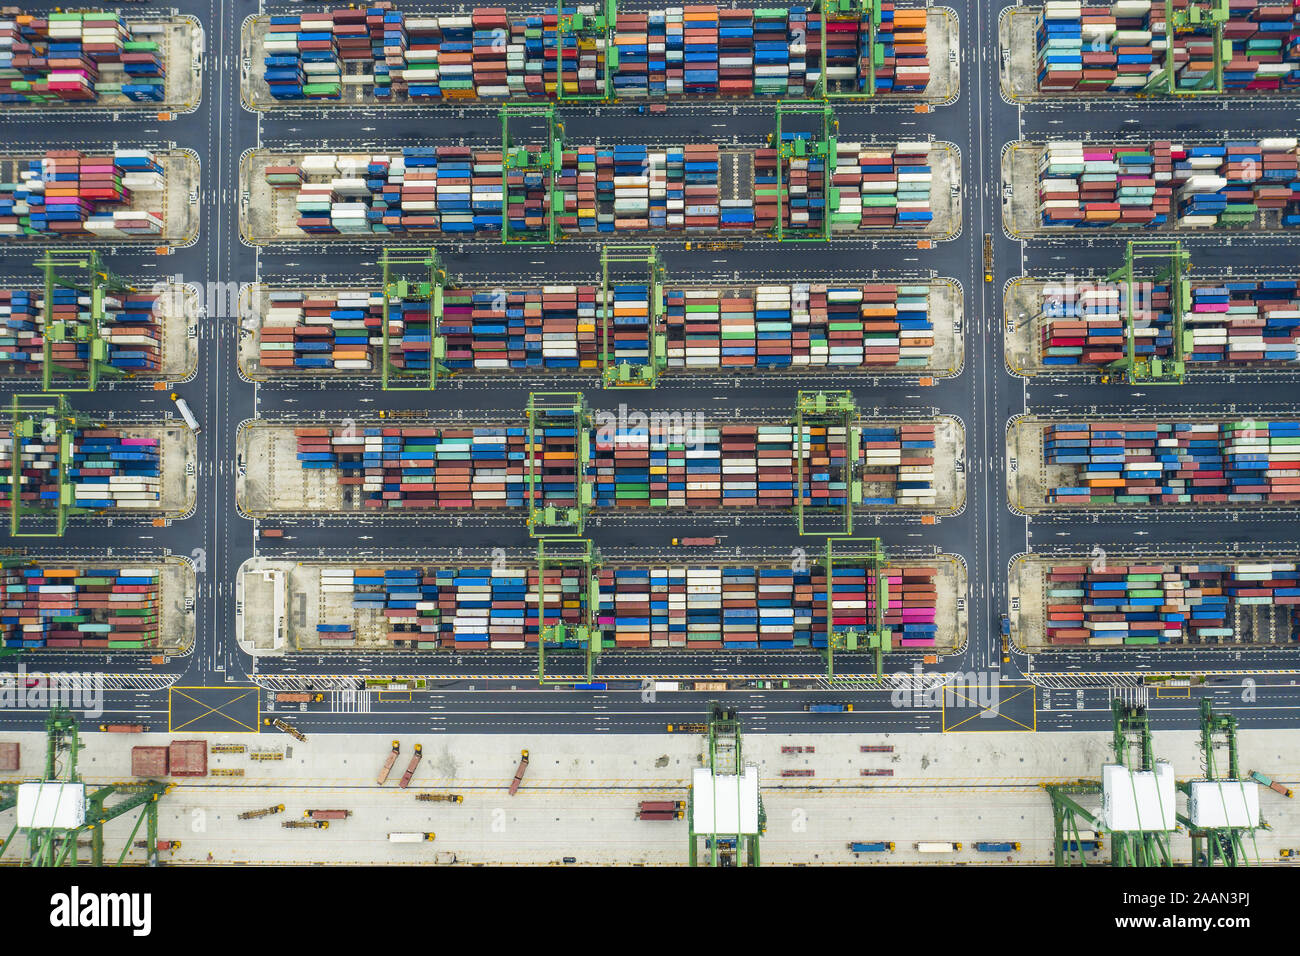 View from above, stunning aerial view of the port of Singapore with thousands of colored containers ready to be loading on the cargo ships. Stock Photo